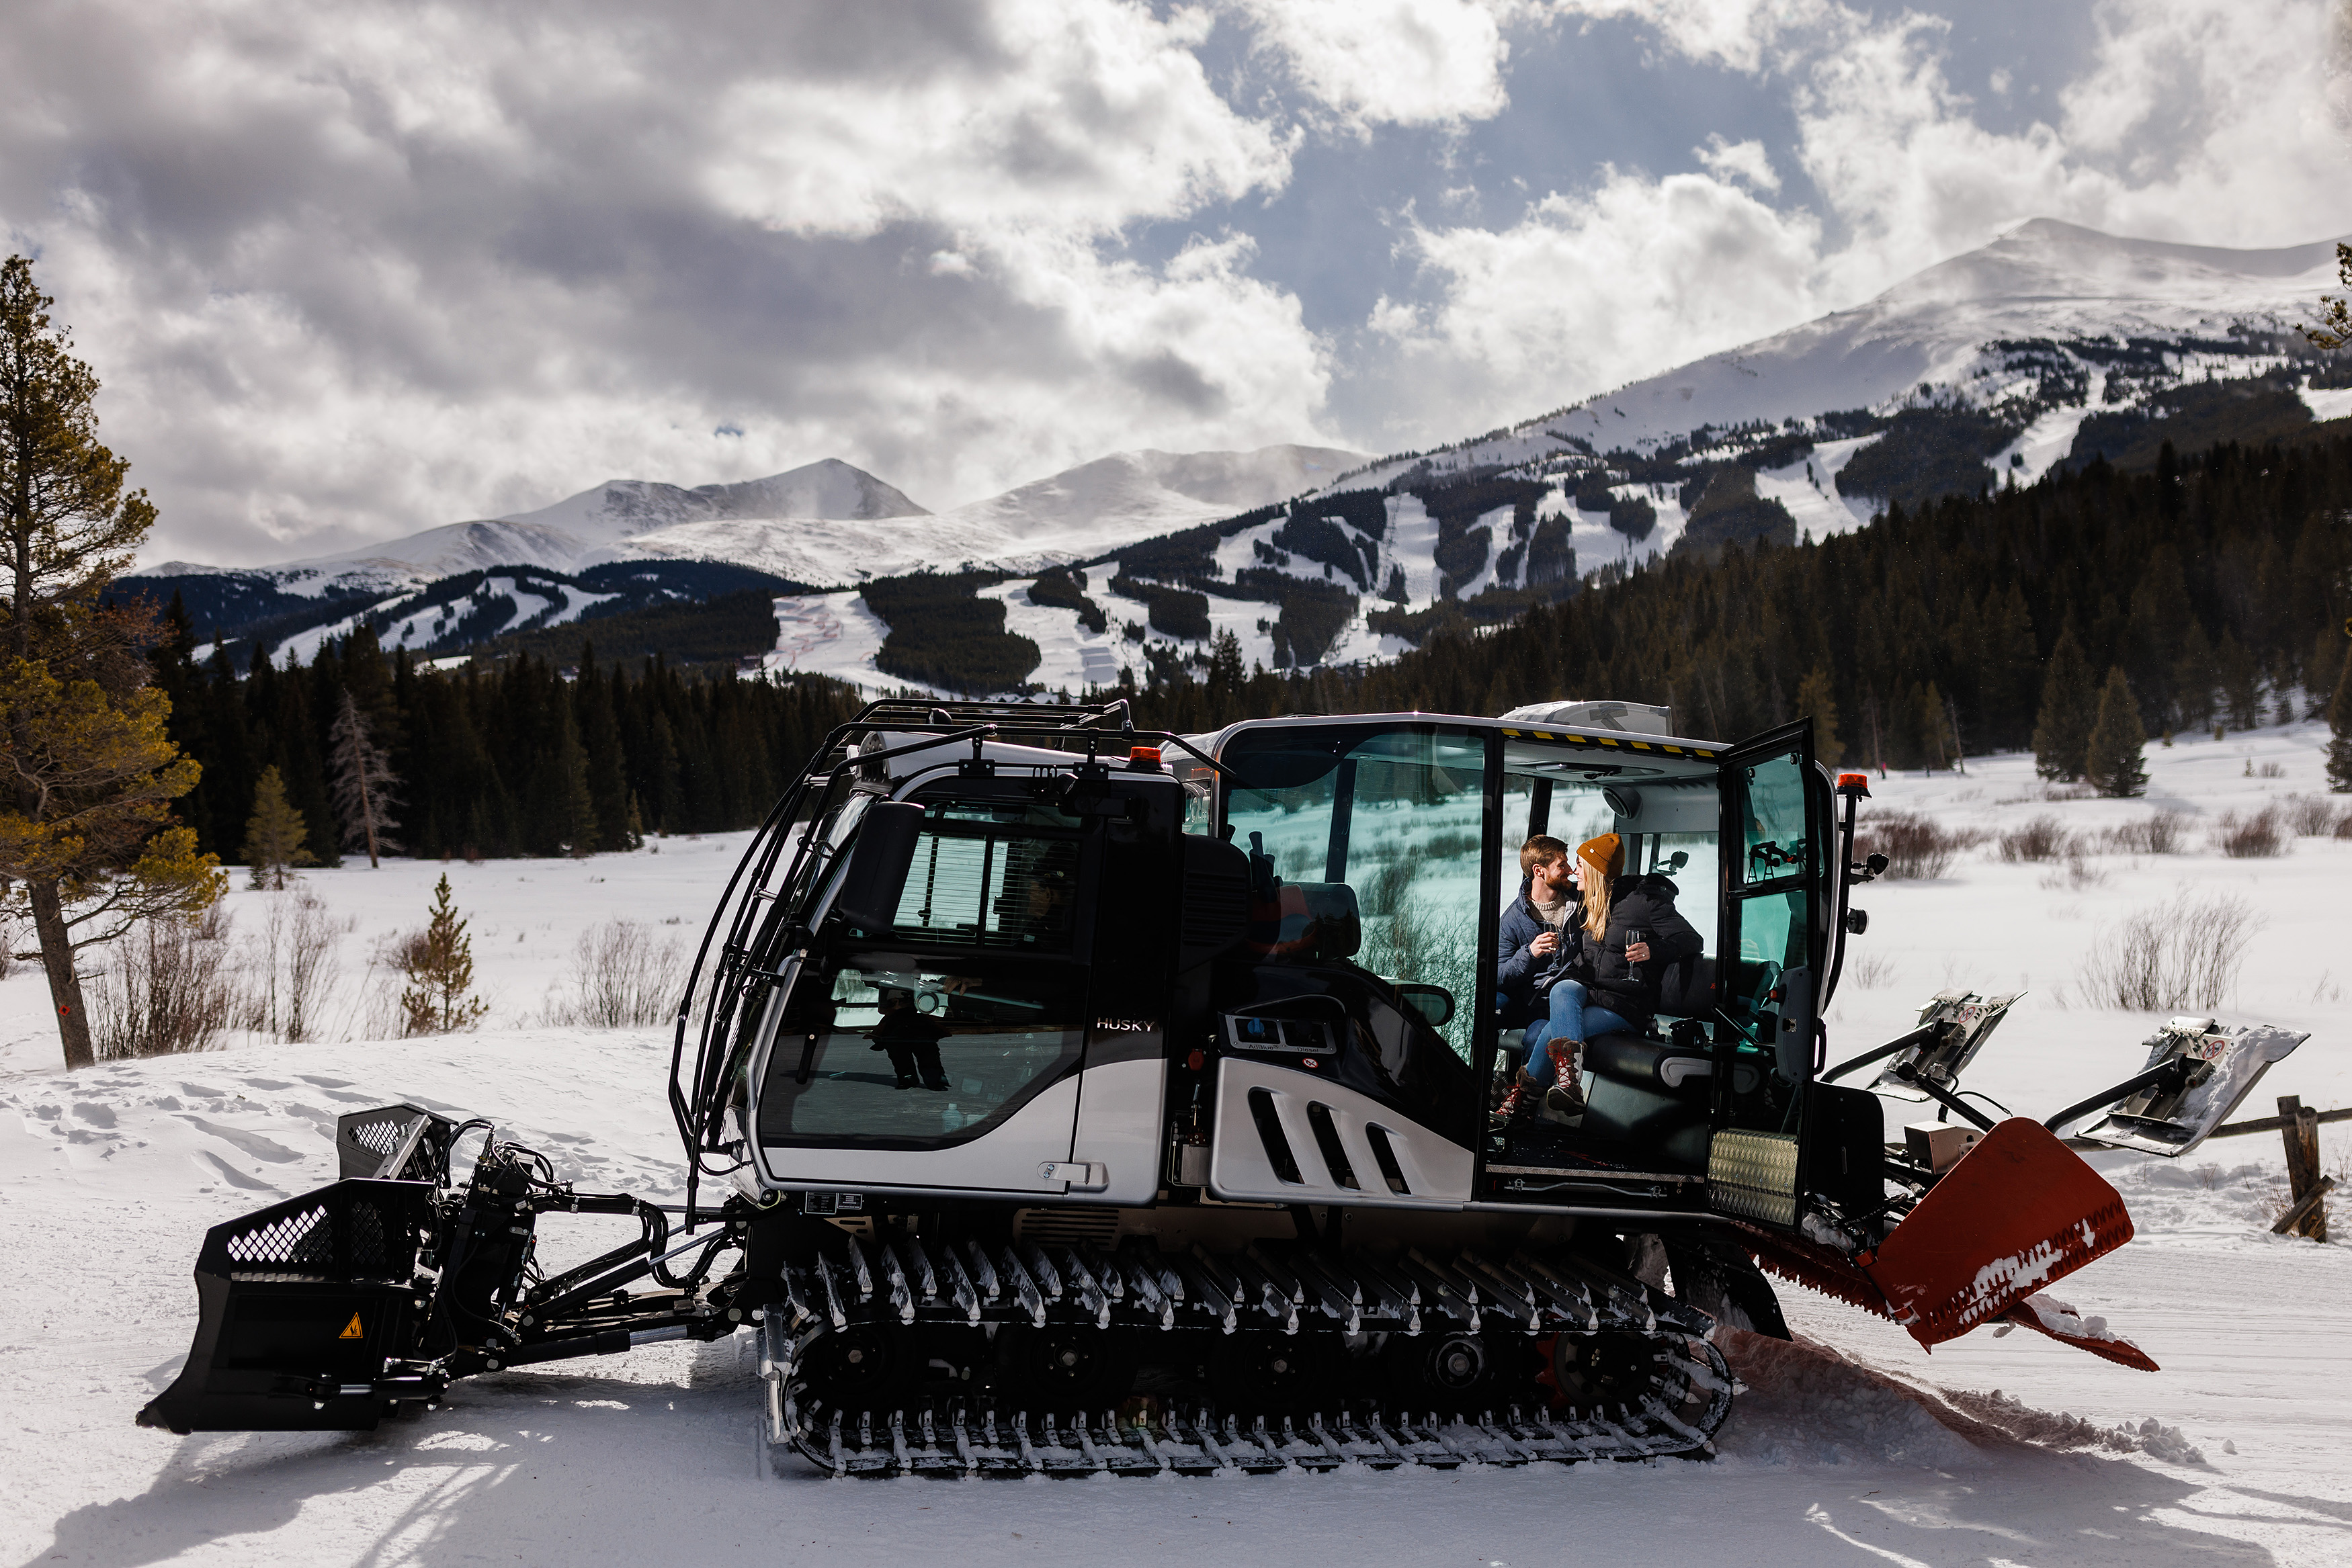 The newly engaged couple sit in a snowcat at the Breckenridge Nordic Center.